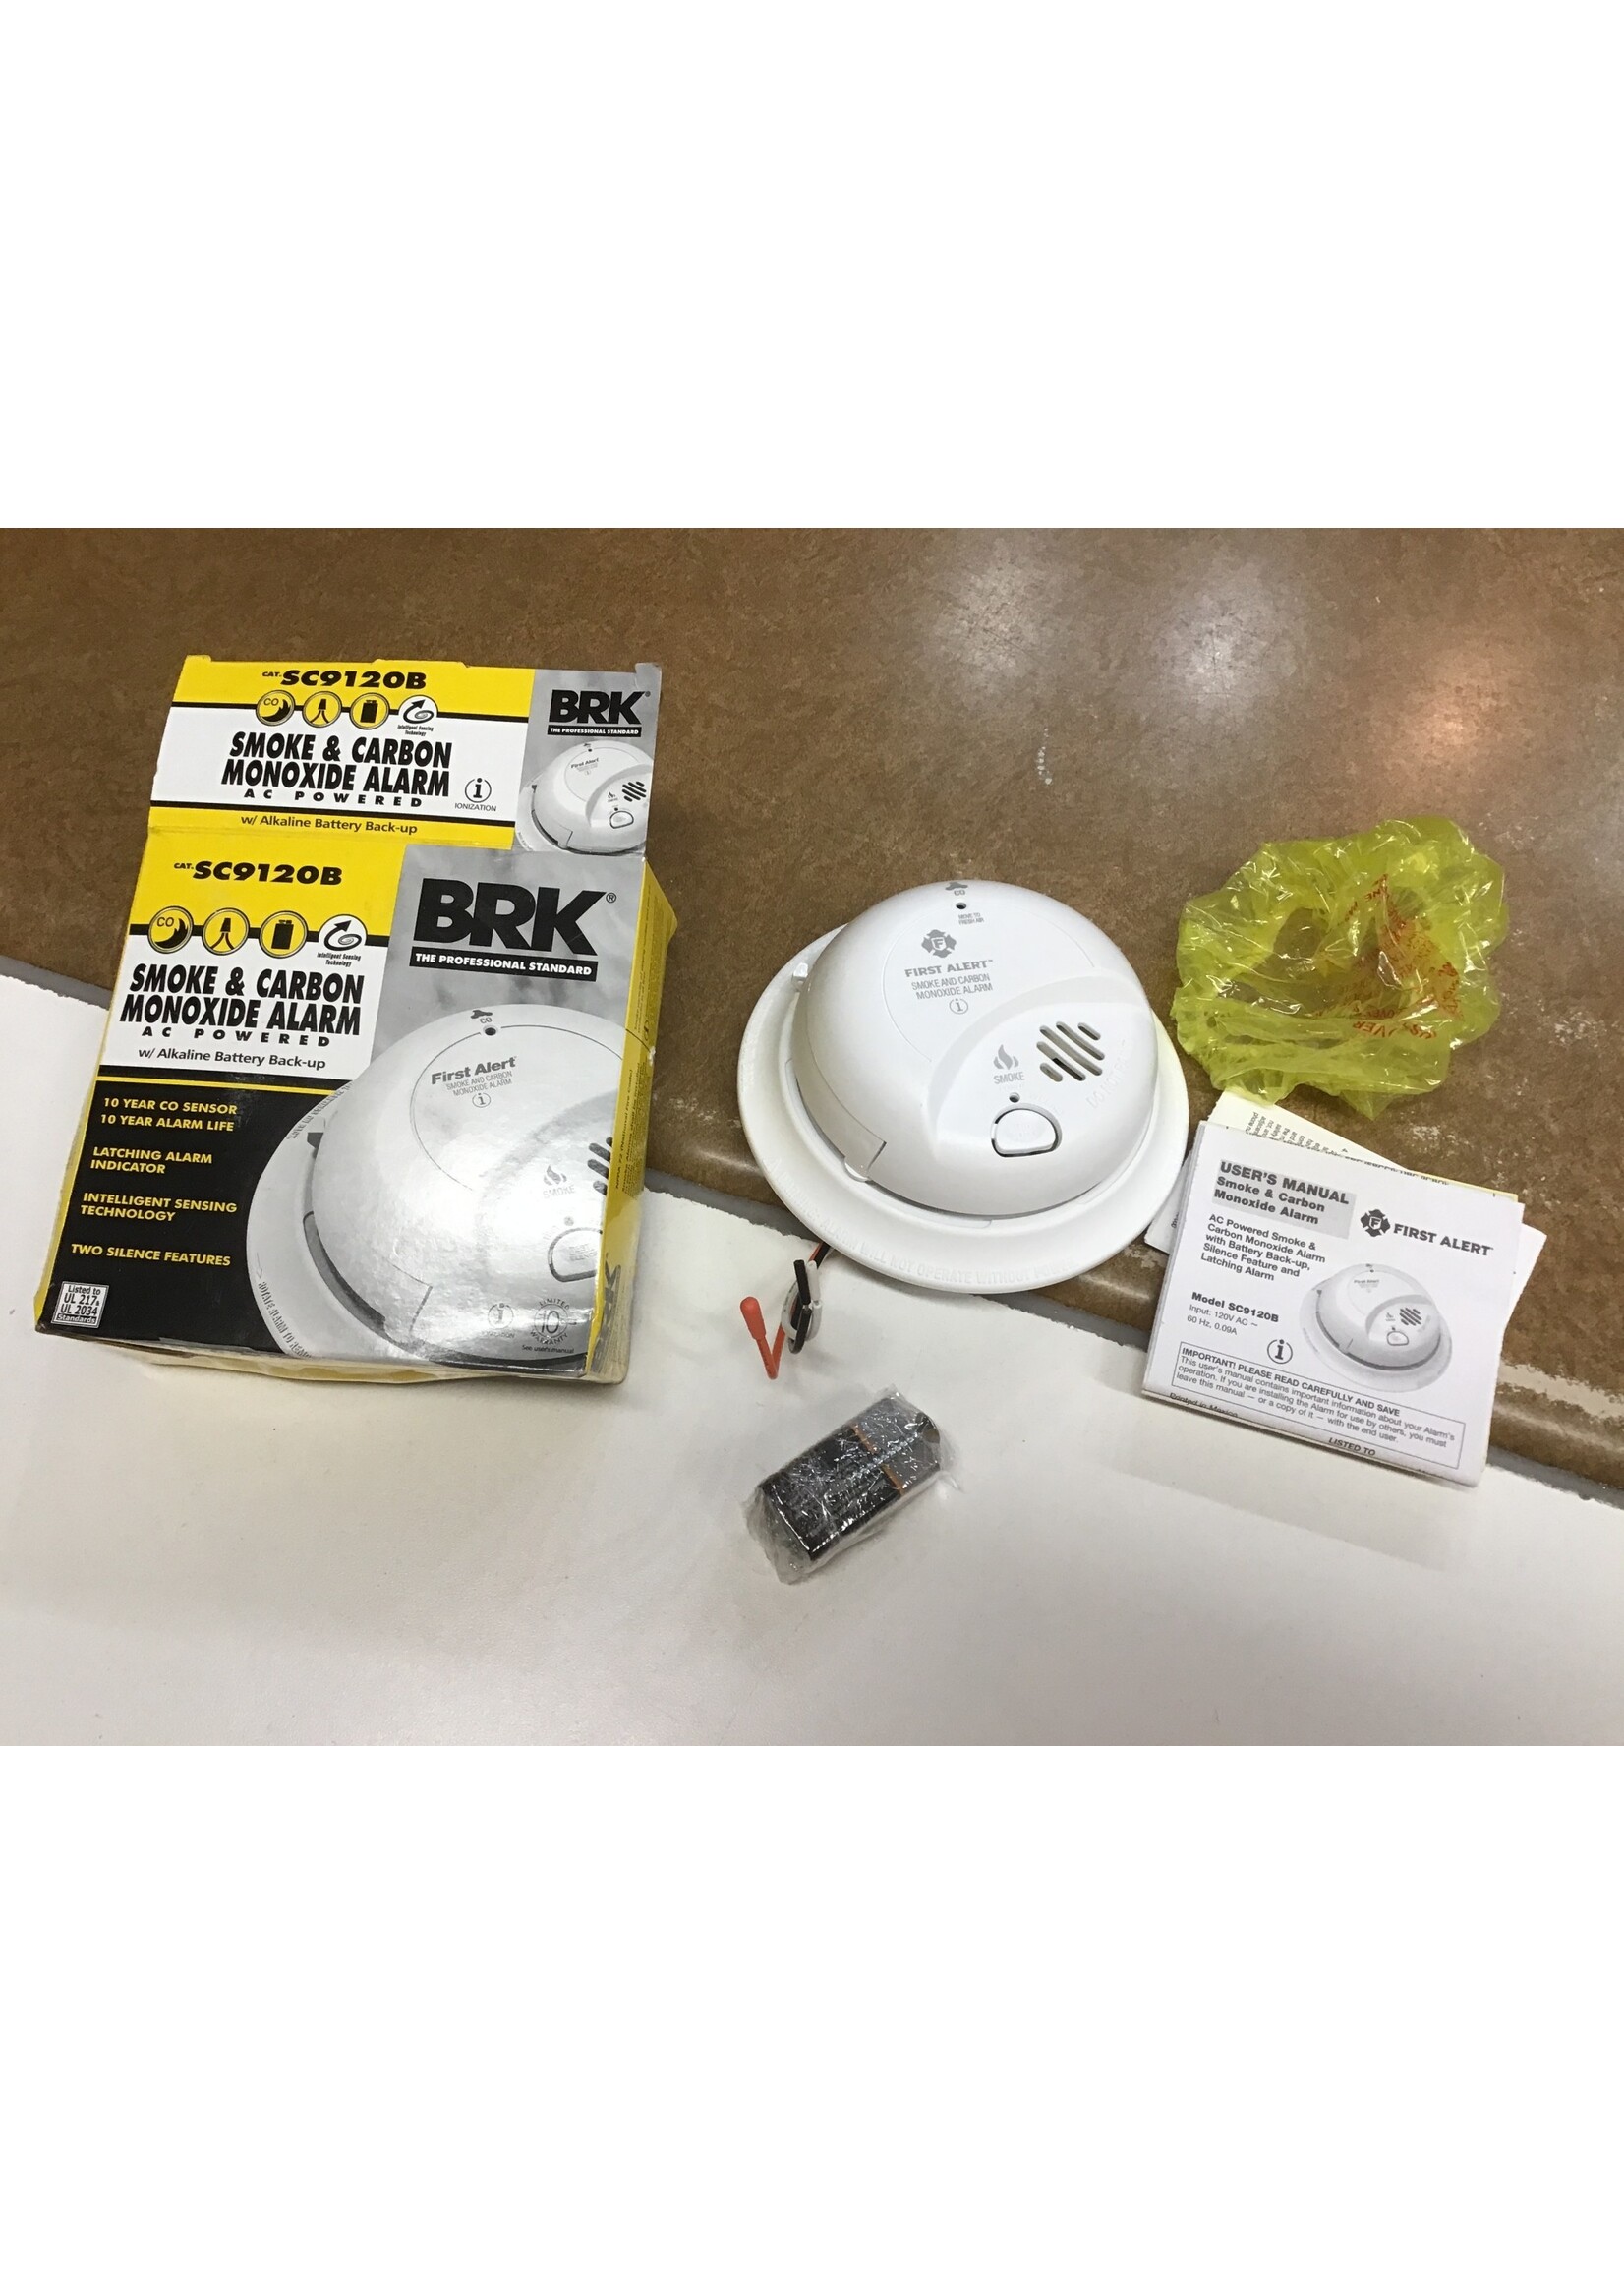 *open box* Smoke/Carbon Monoxide Detector 120V w/Battery Backup Hard Wired / 9V Back-up Battery included (all here, tested)